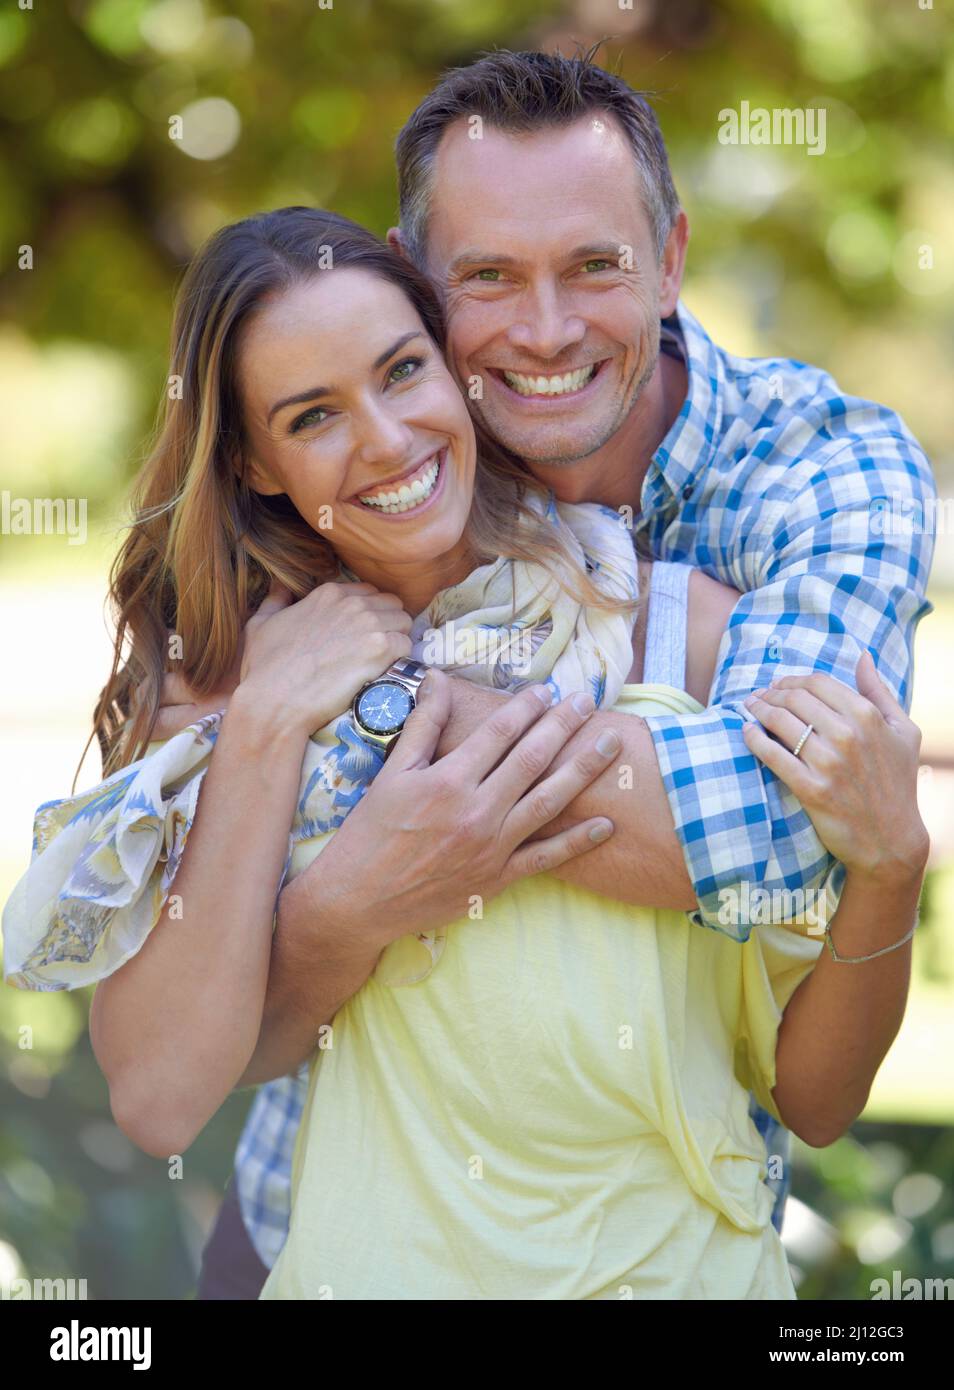 Shes my prisoner of love. Portrait of an affectionate couple outside in the summer sun. Stock Photo